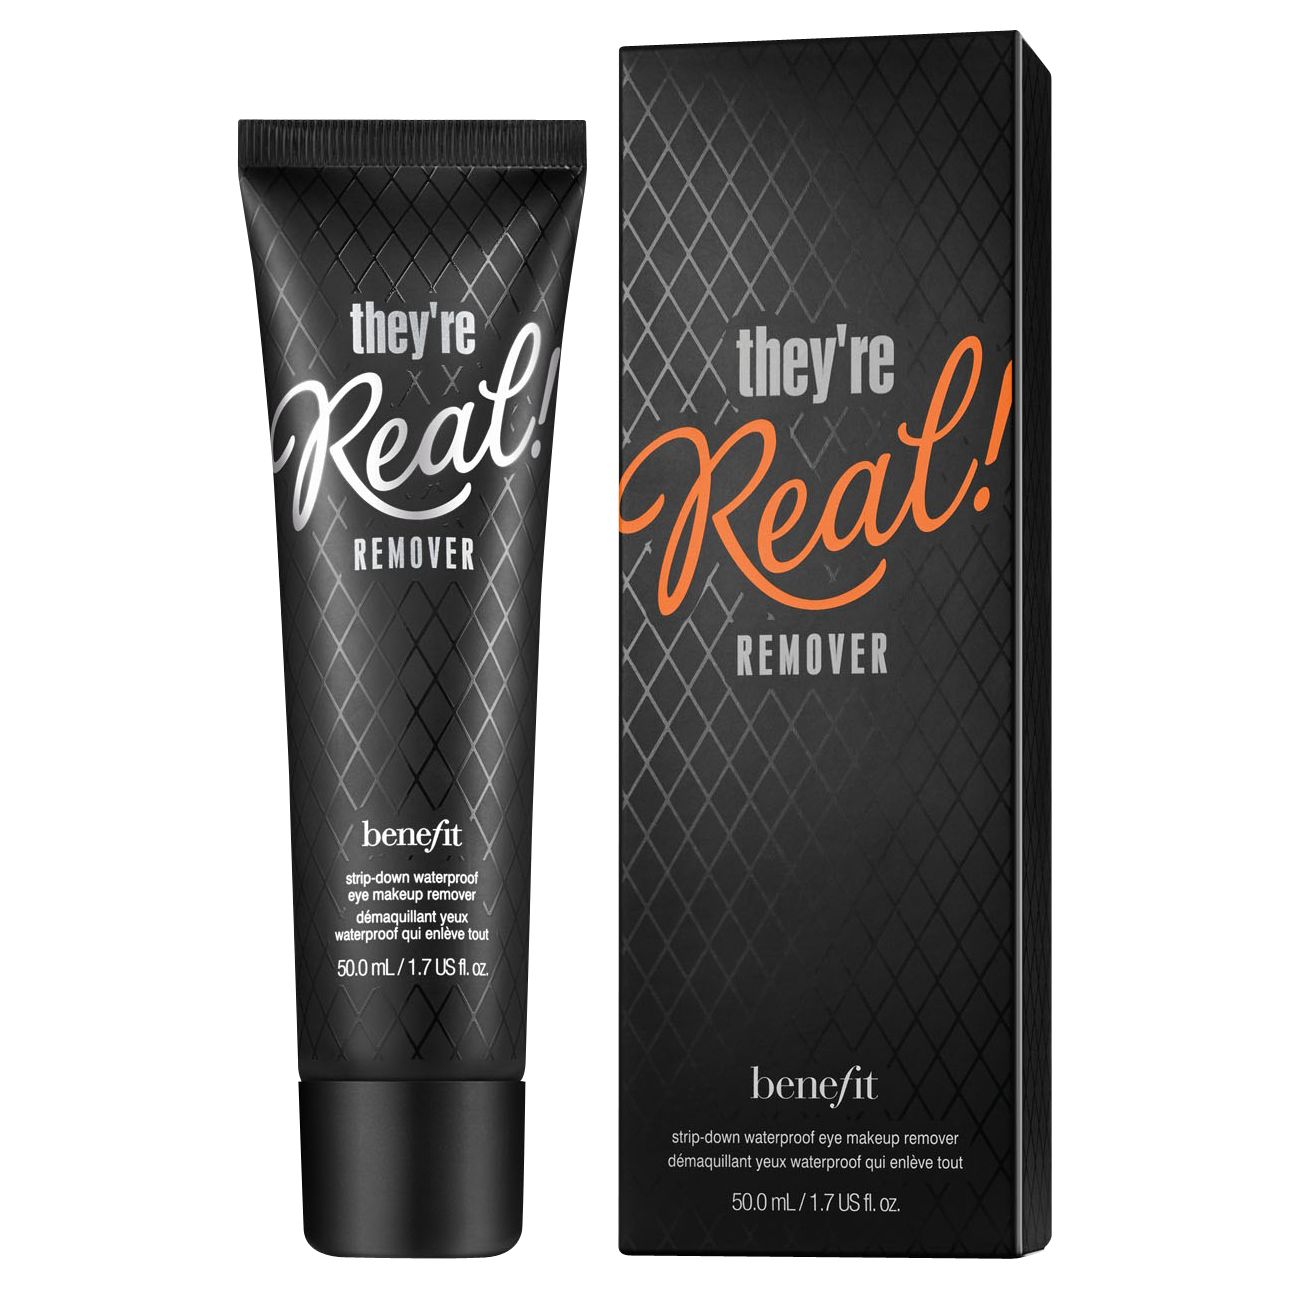 Benefit They're Real! Remover, 50ml